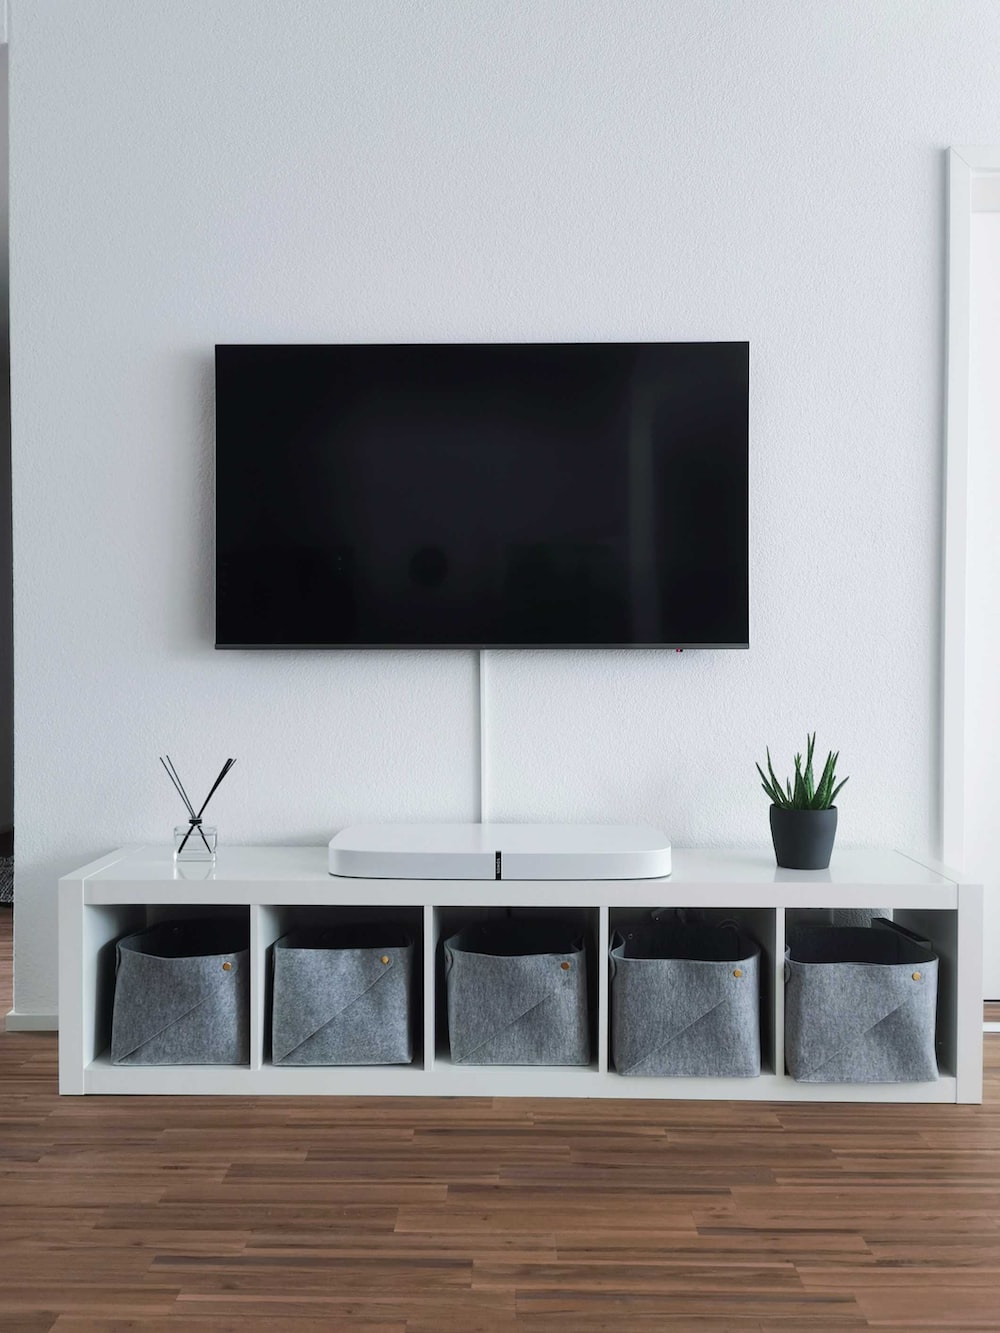 What should you put under a mounted TV?